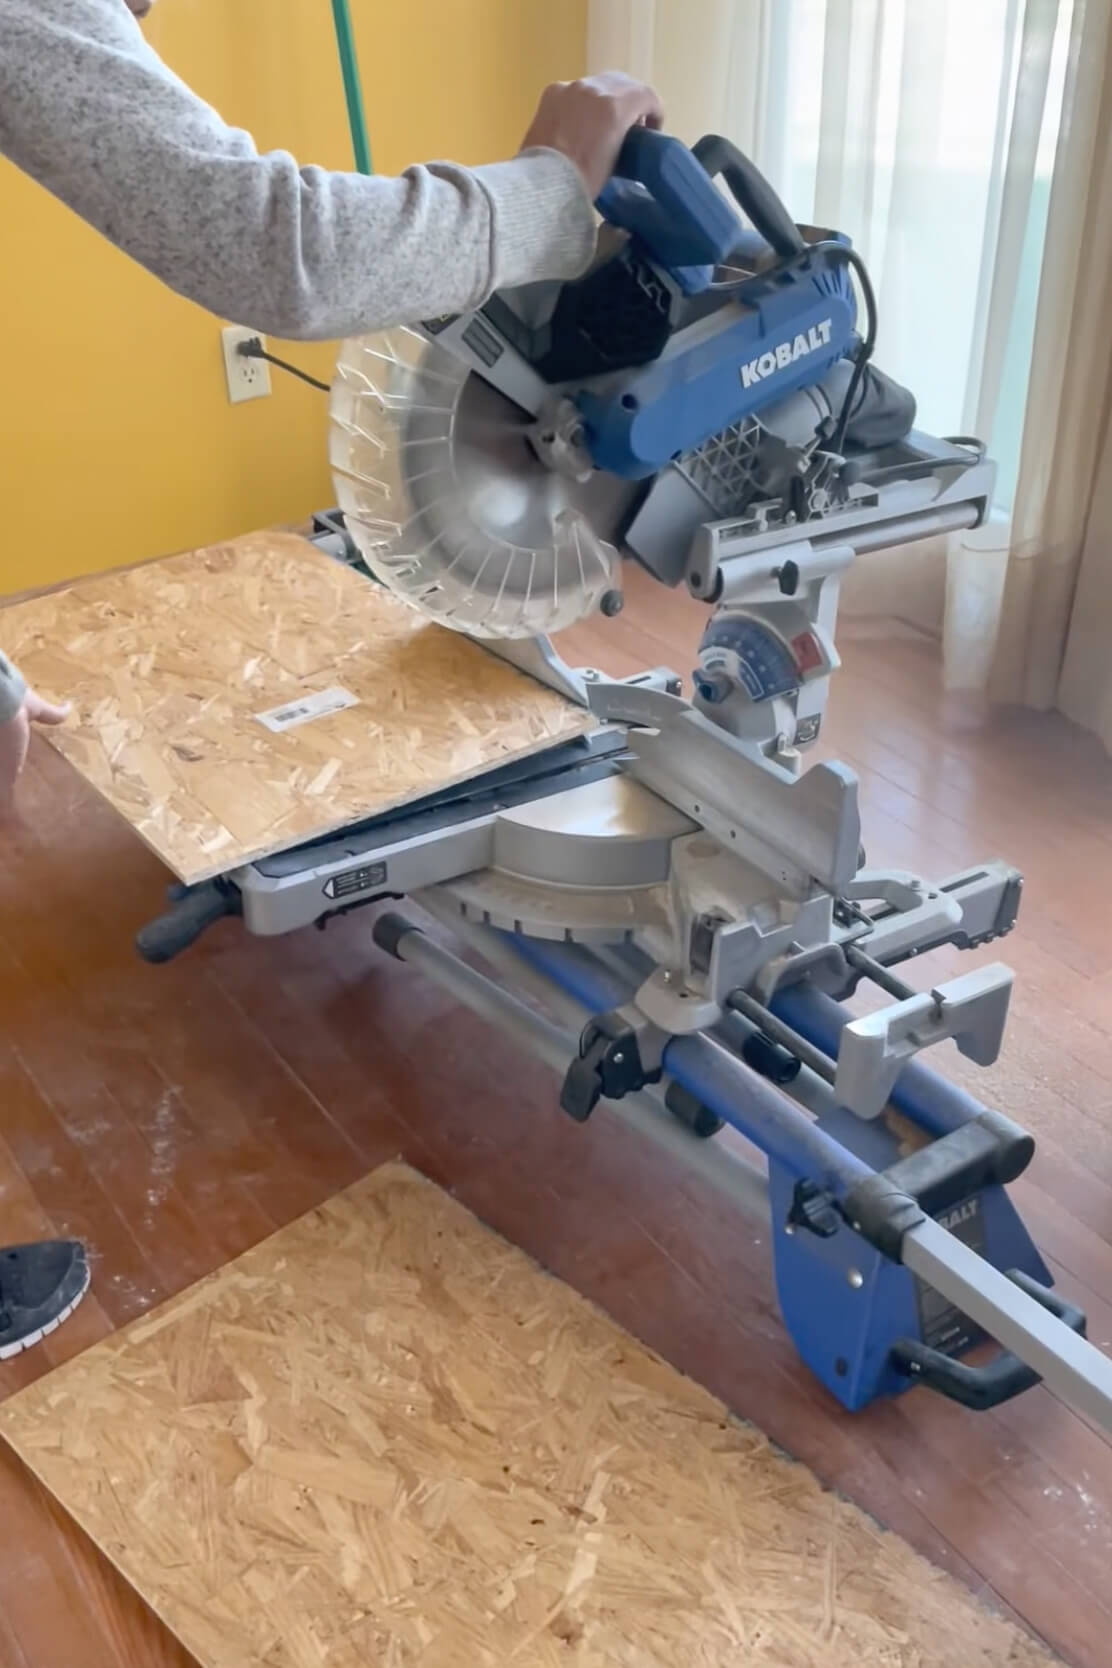 Using a miter saw to cut wood to make an arched doorway.